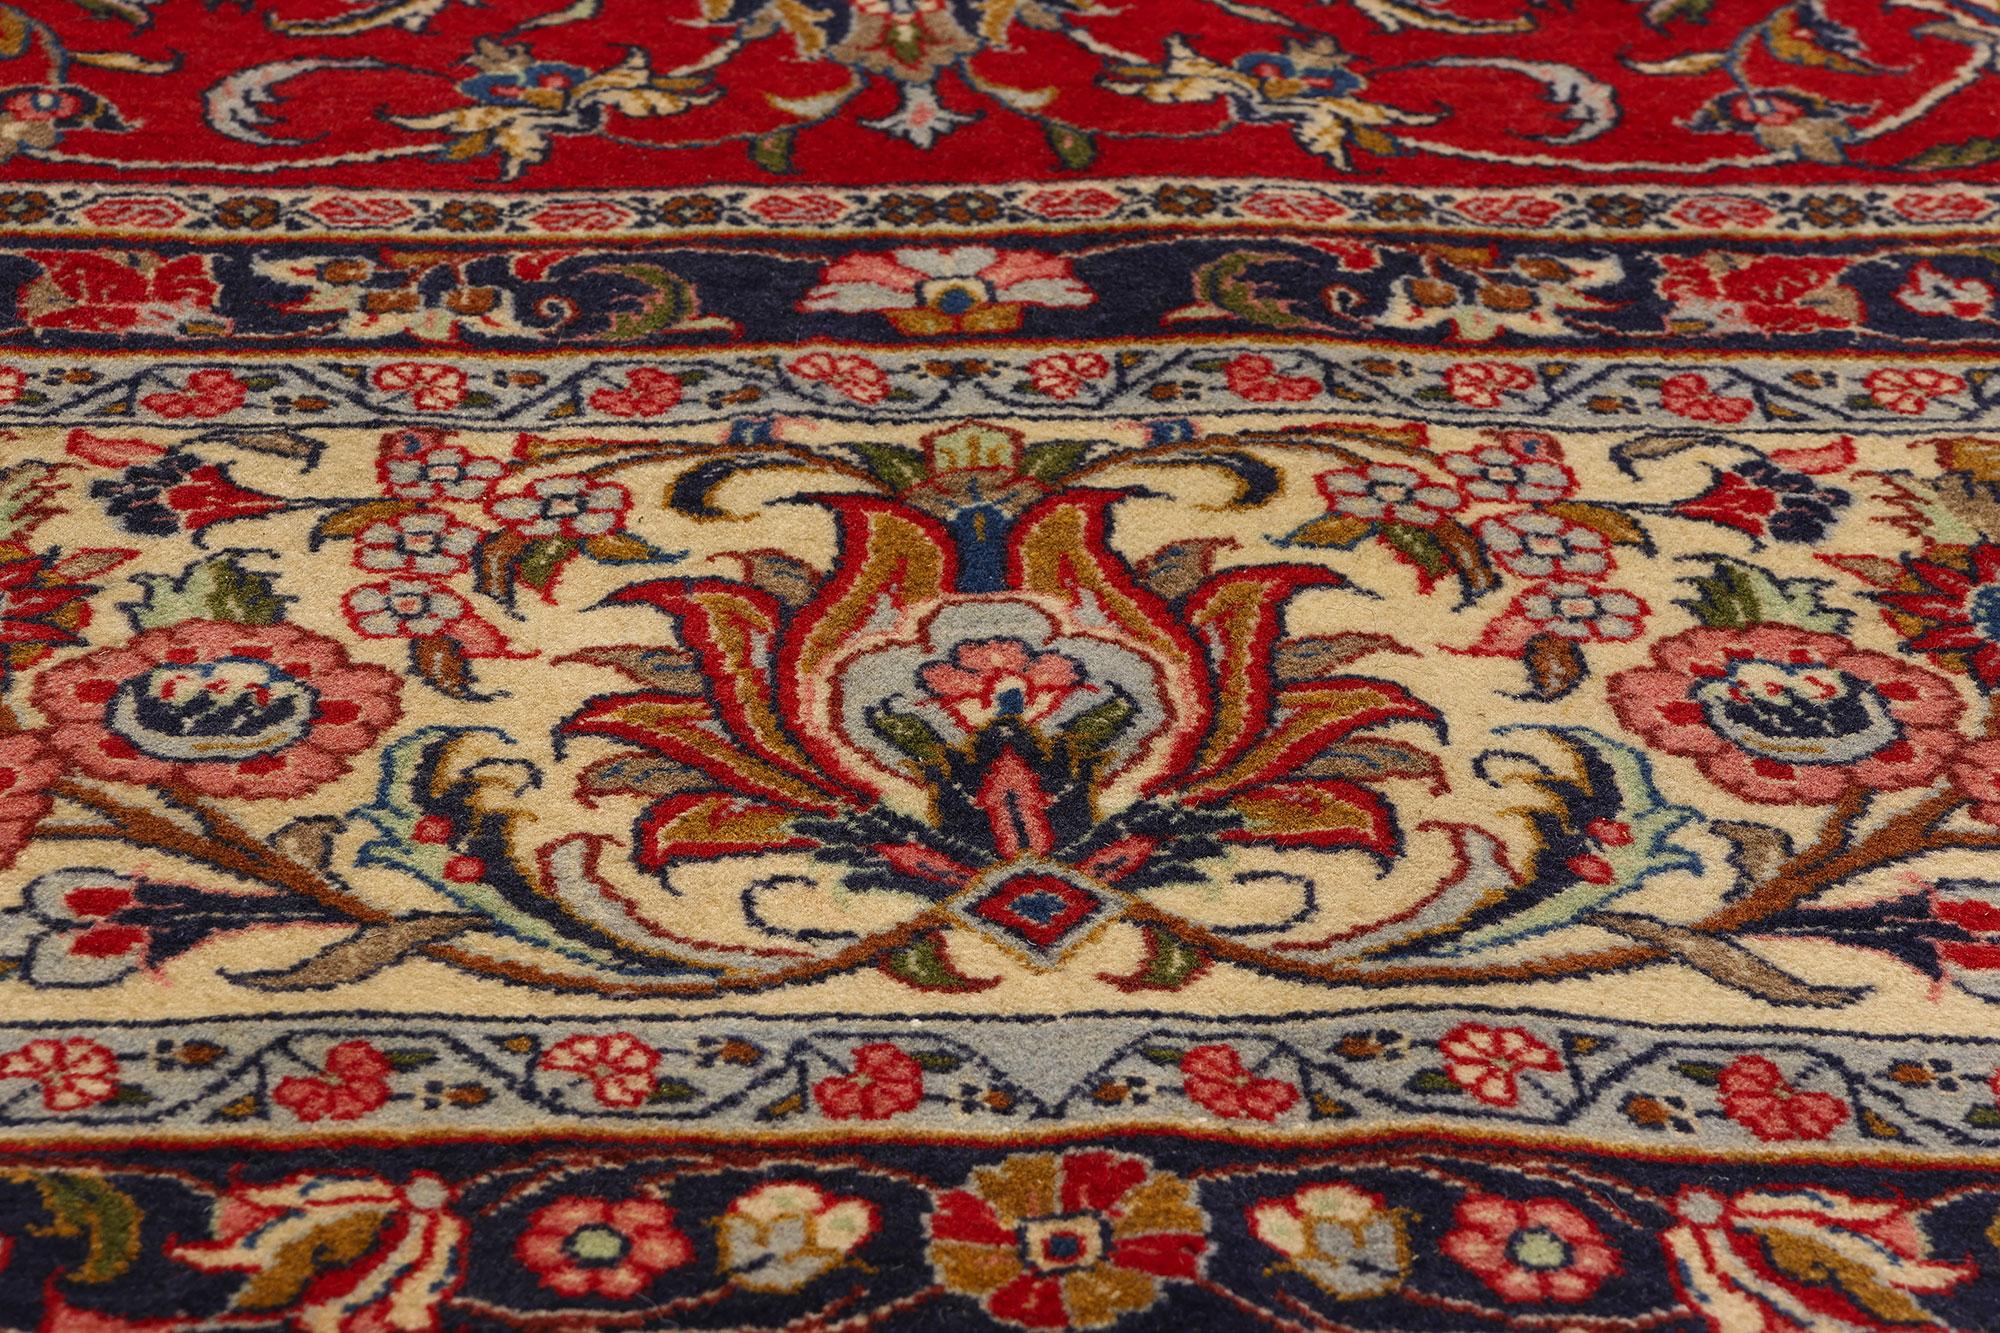 1950s Vintage Persian Kashan Rug, Timeless Elegance Meets Stately Decadence In Good Condition For Sale In Dallas, TX